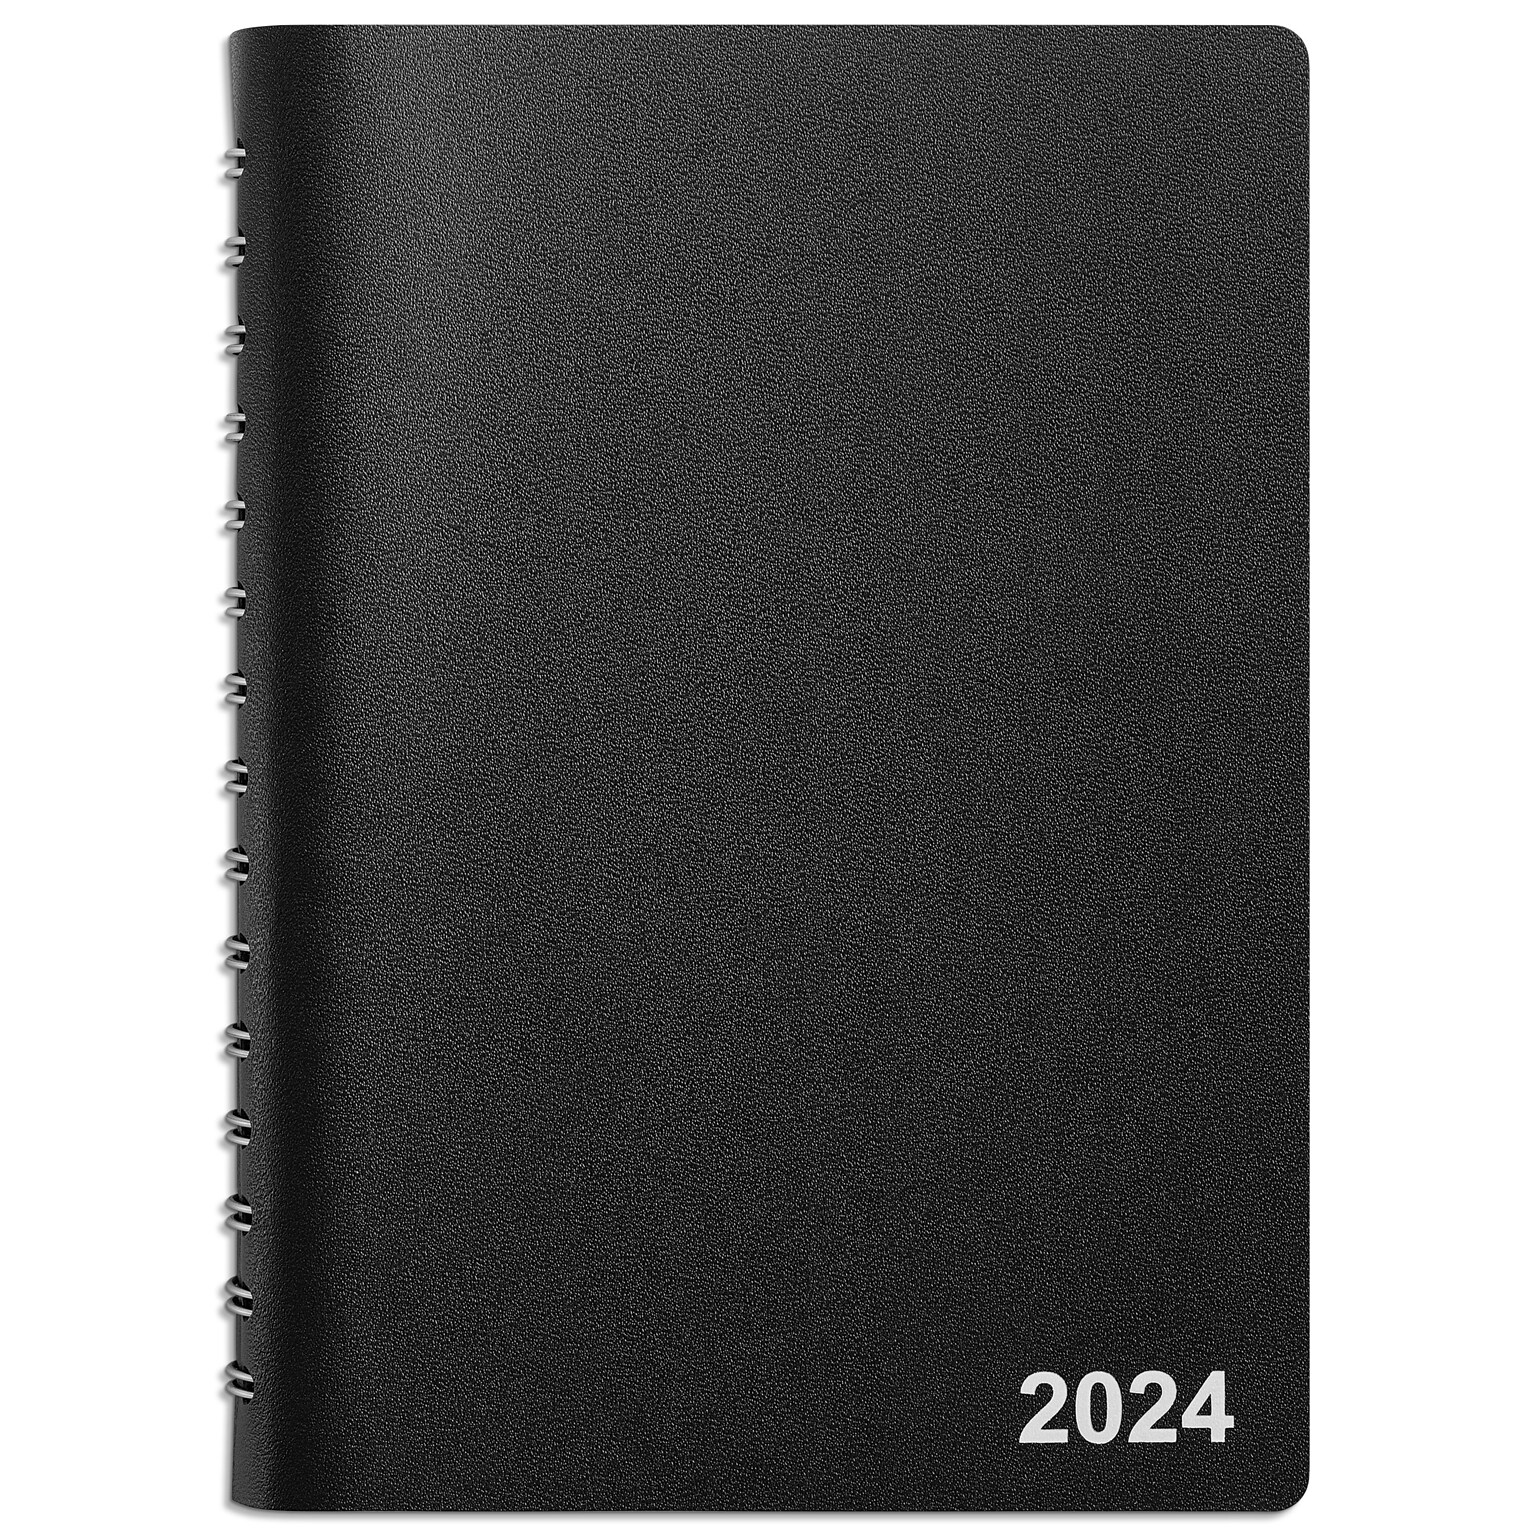 2024 Staples 5 x 8 Daily Appointment Book, Black (ST58452-24)